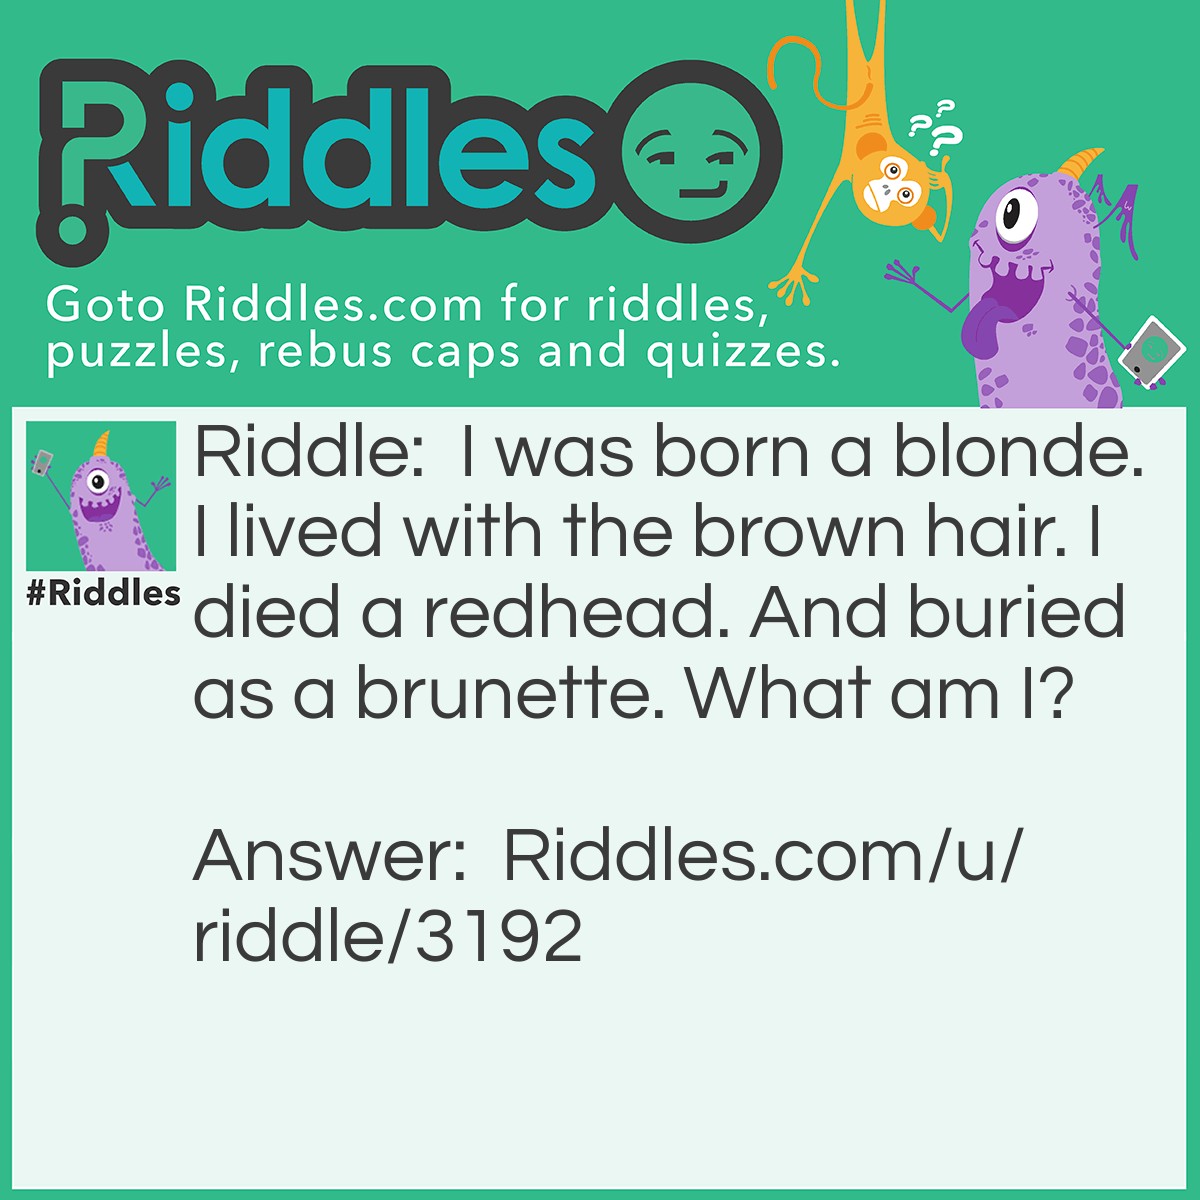 Riddle: I was born a blonde. I lived with the brown hair. I died a redhead. And buried as a brunette. What am I? Answer: A Match.